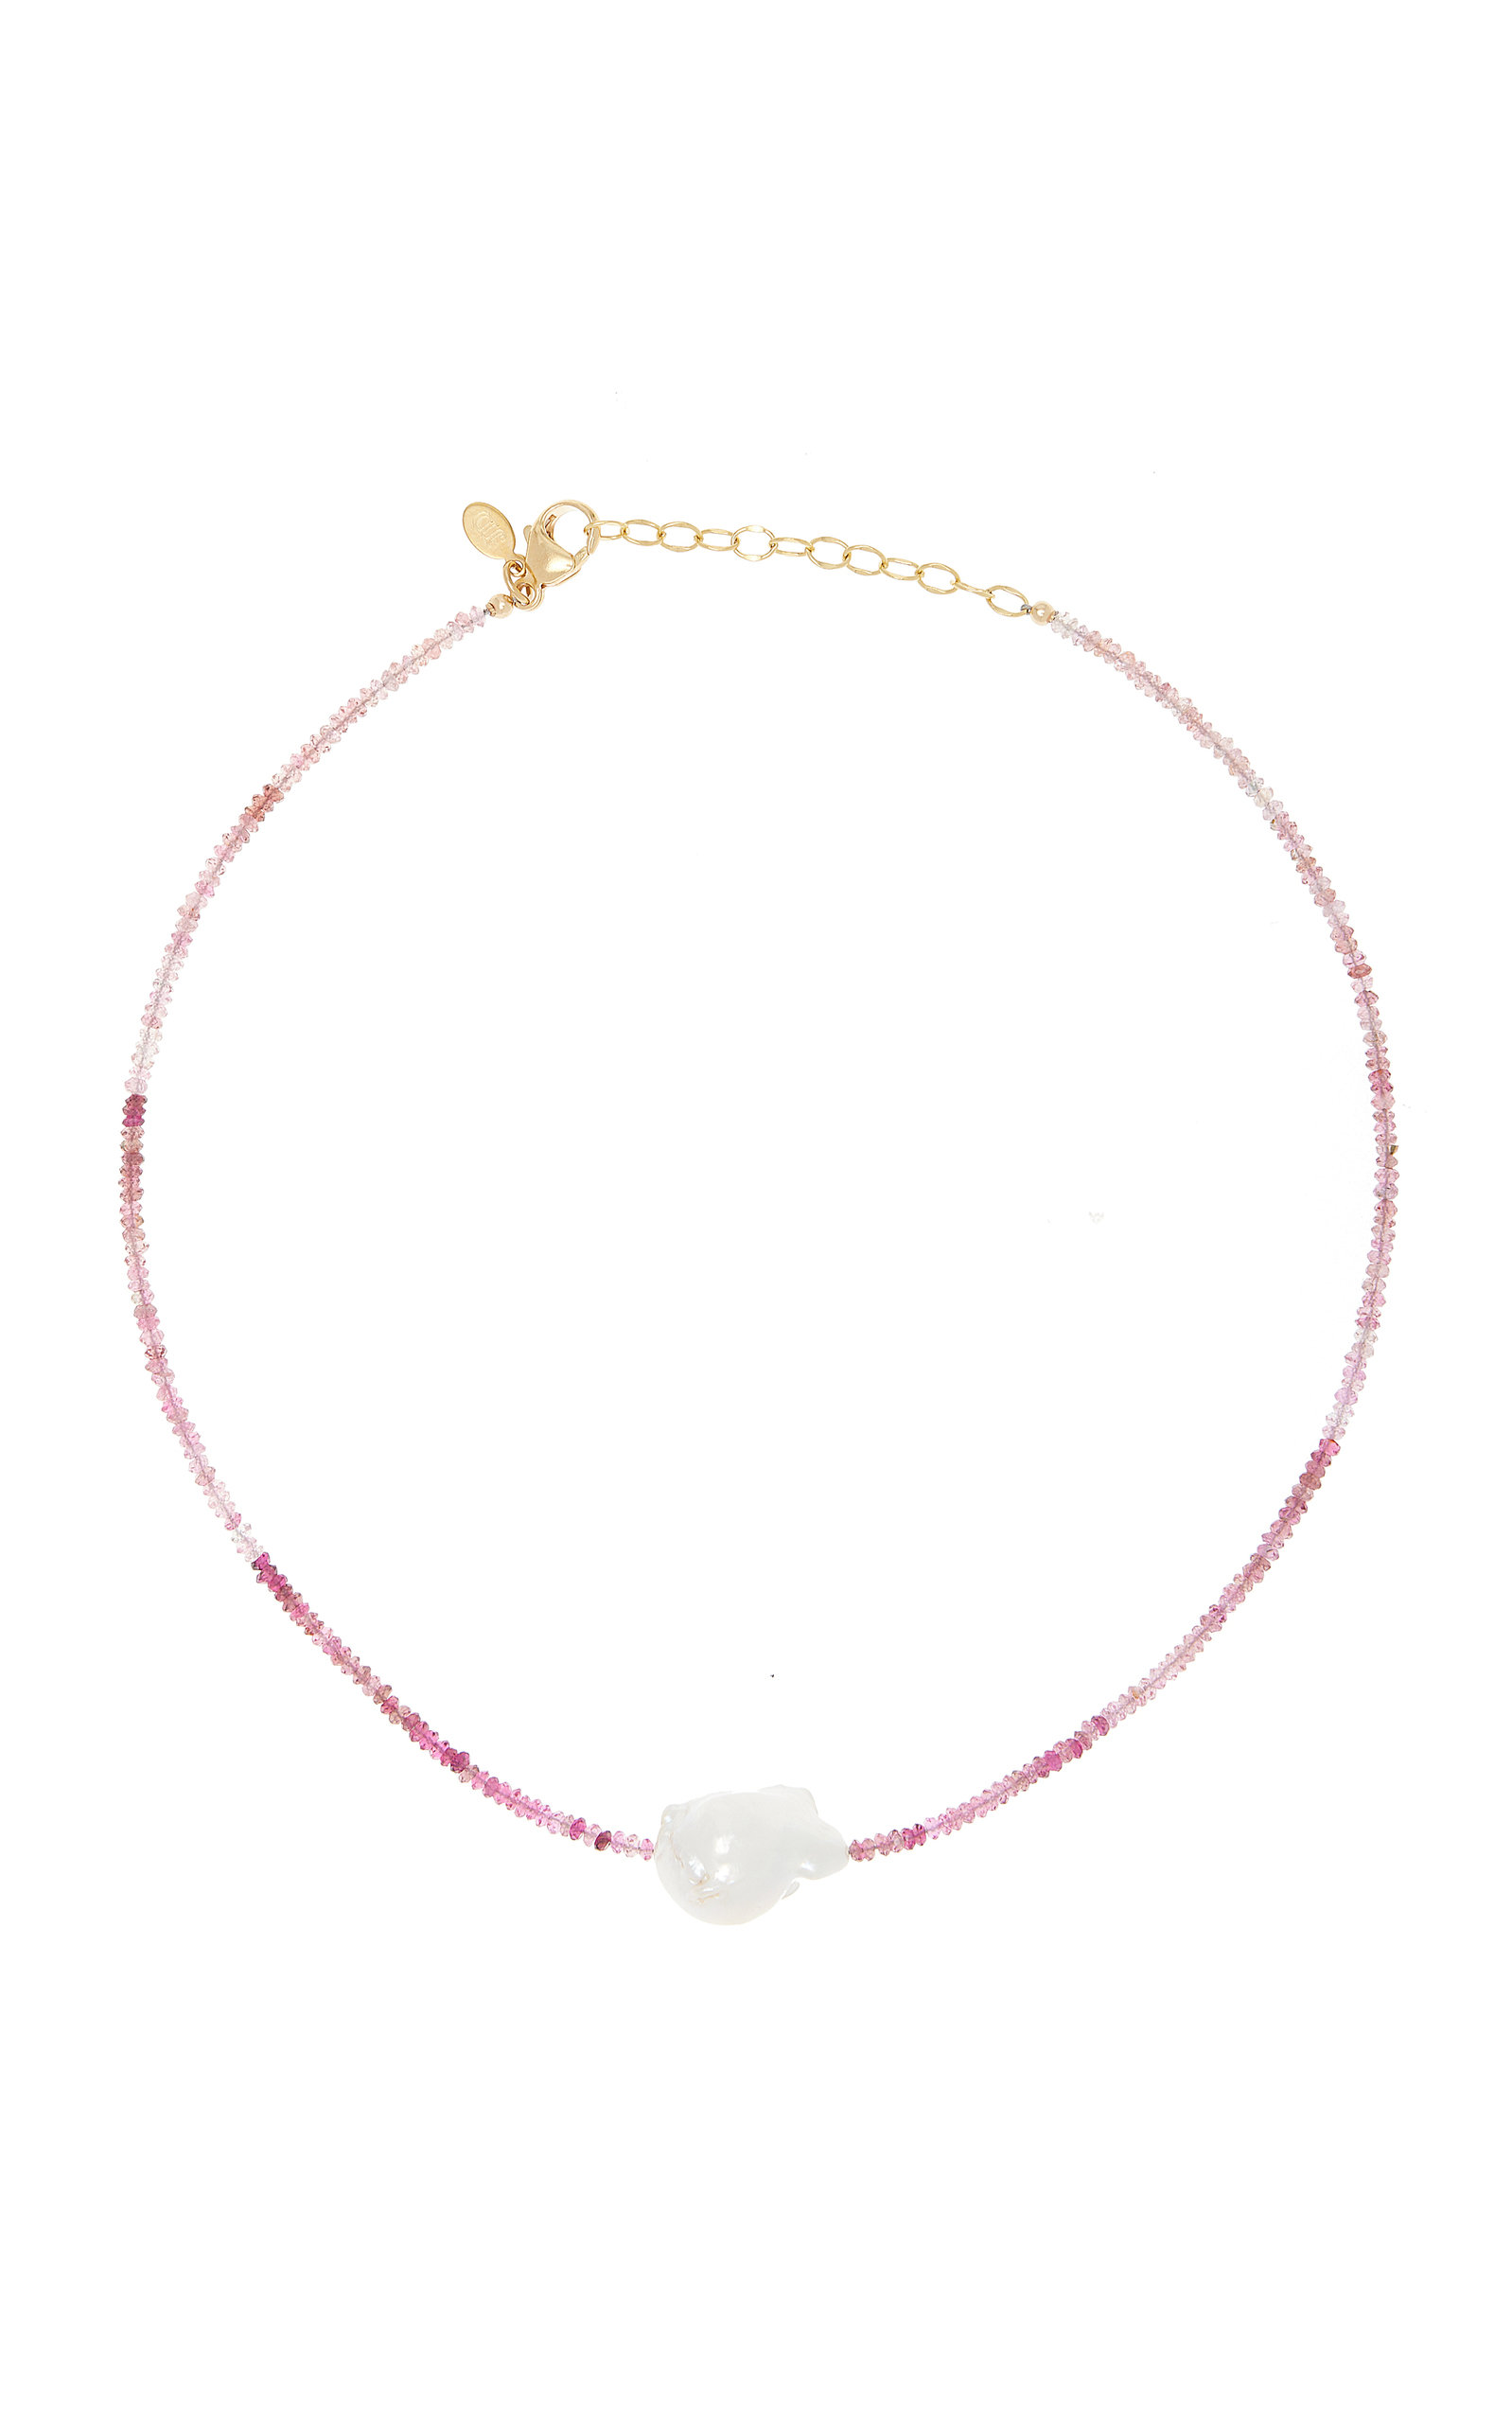 Joie DiGiovanni Women's Tourmaline And Pearl Necklace